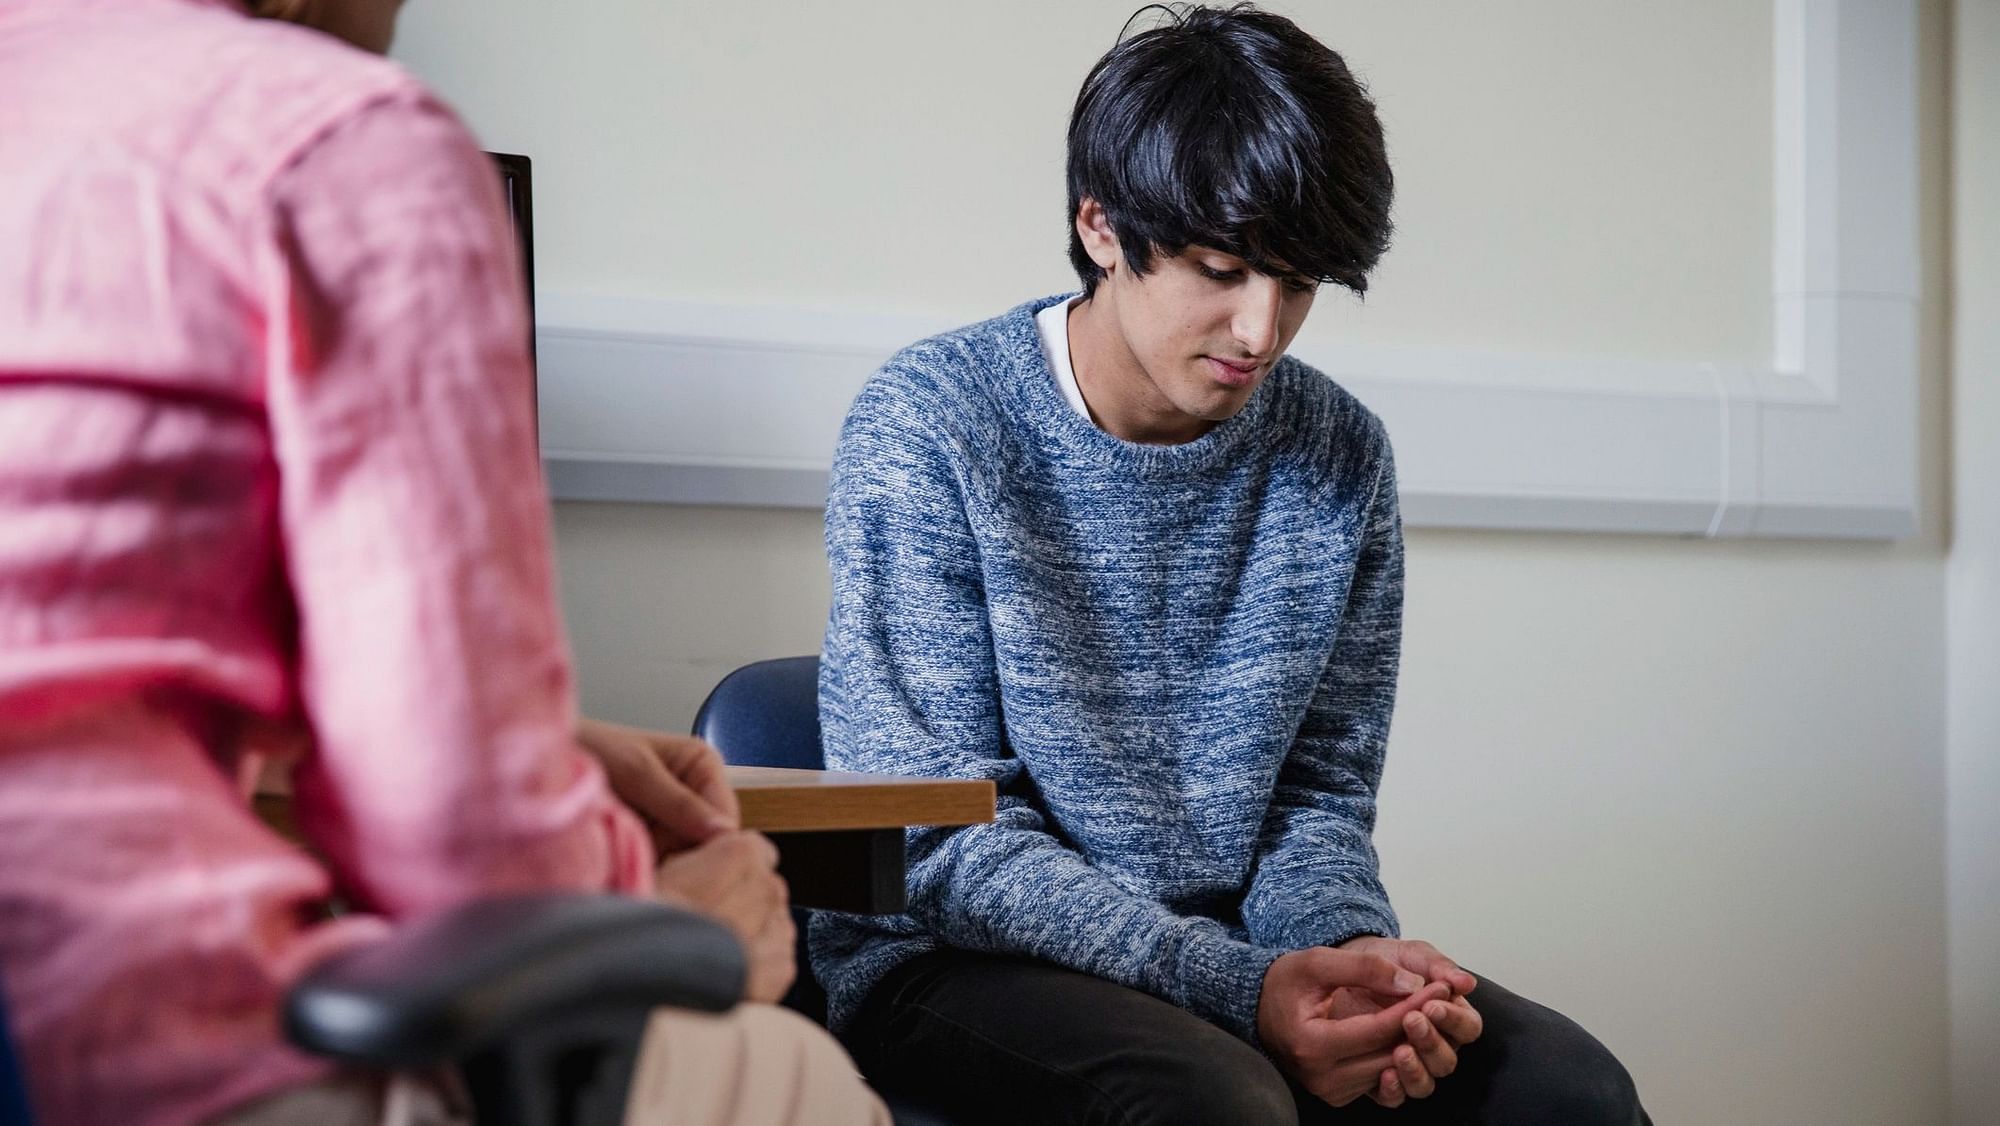 The number of students who report suffering from anxiety disorder has doubled.